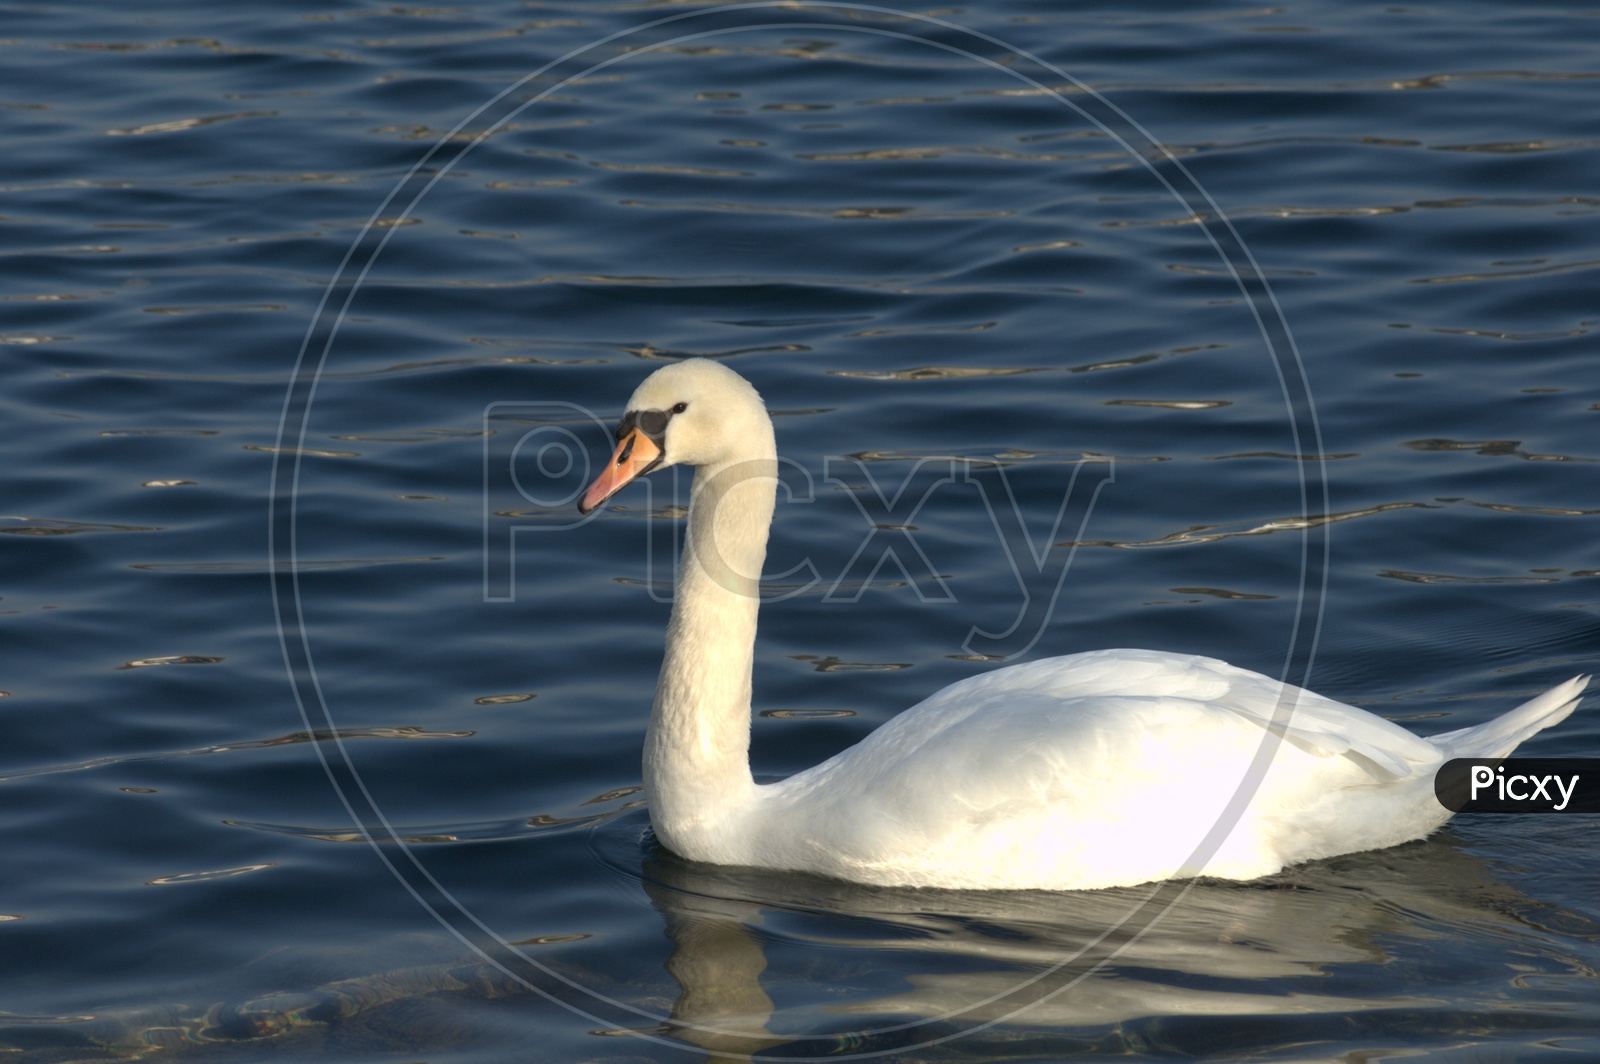 A Tundra Swan moving alongside on the water